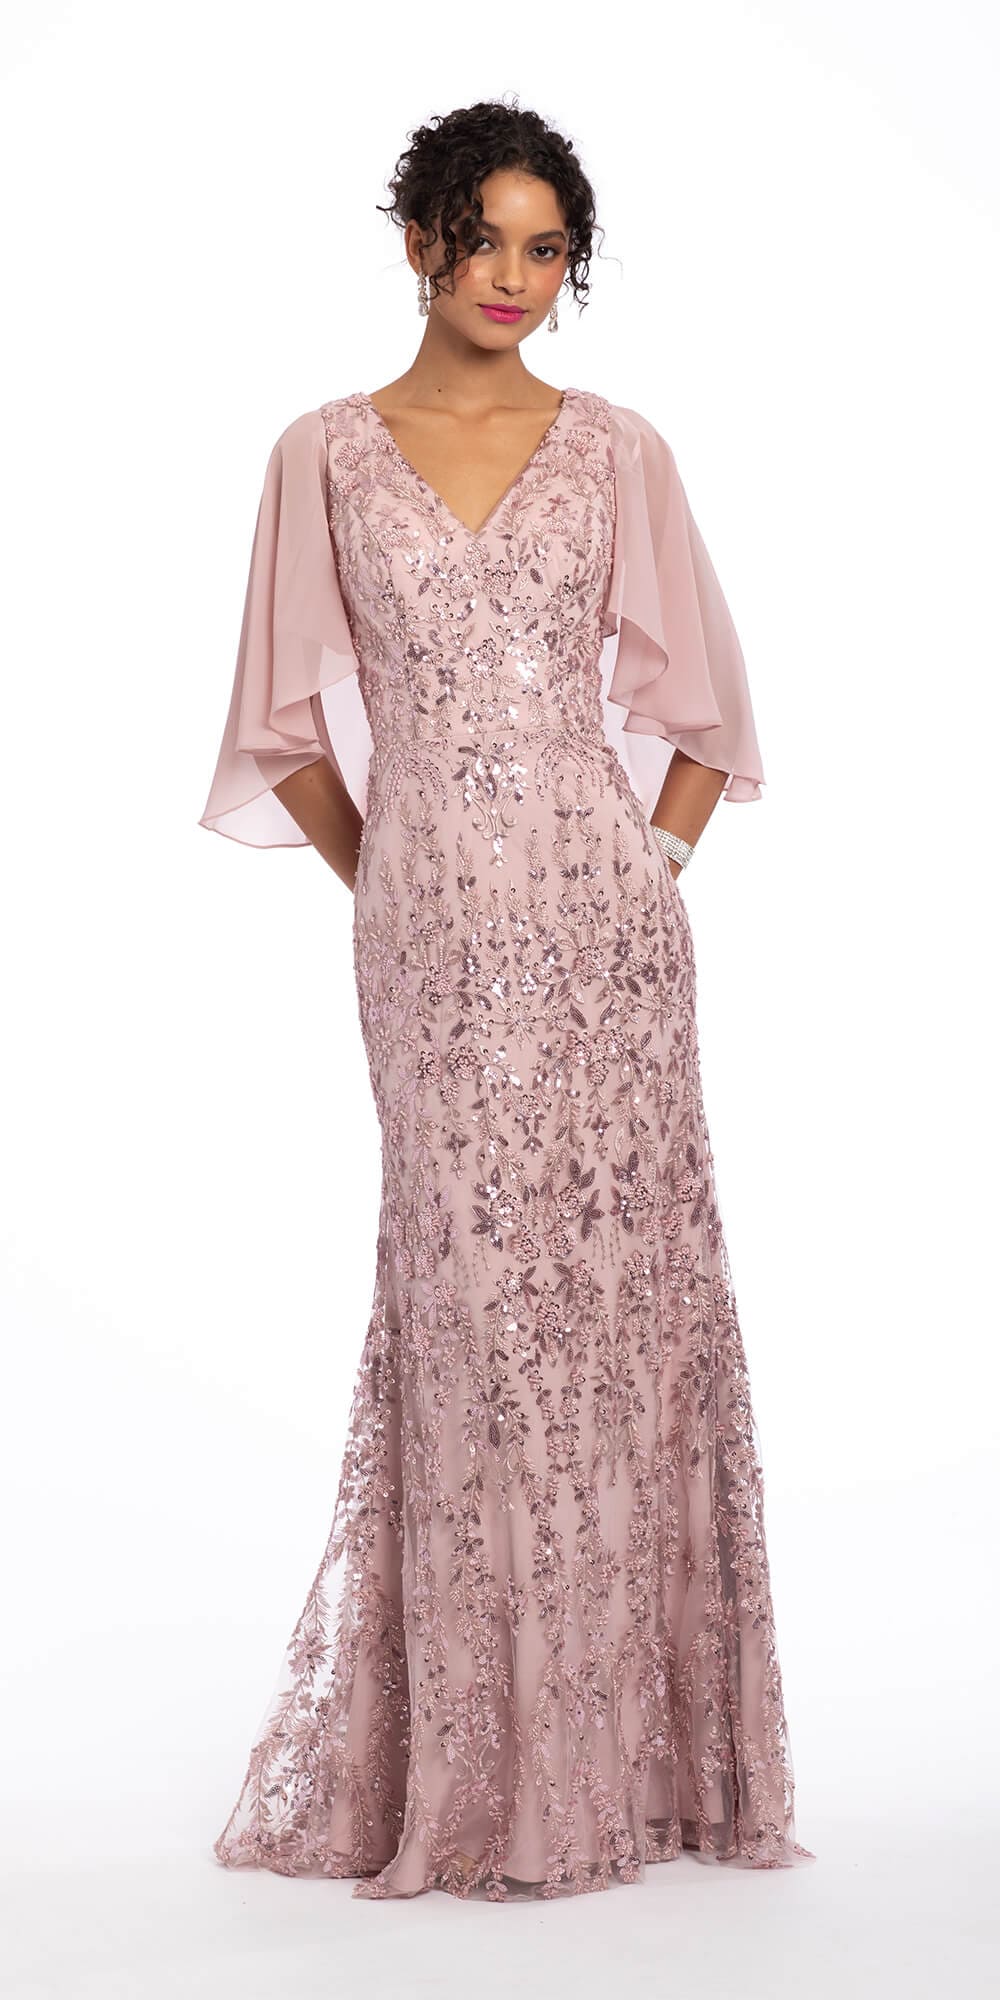 Camille La Vie Illusion Sequin Embroidered V Neck Dress Chiffon Flutter Sleeves missy / 8 / rose